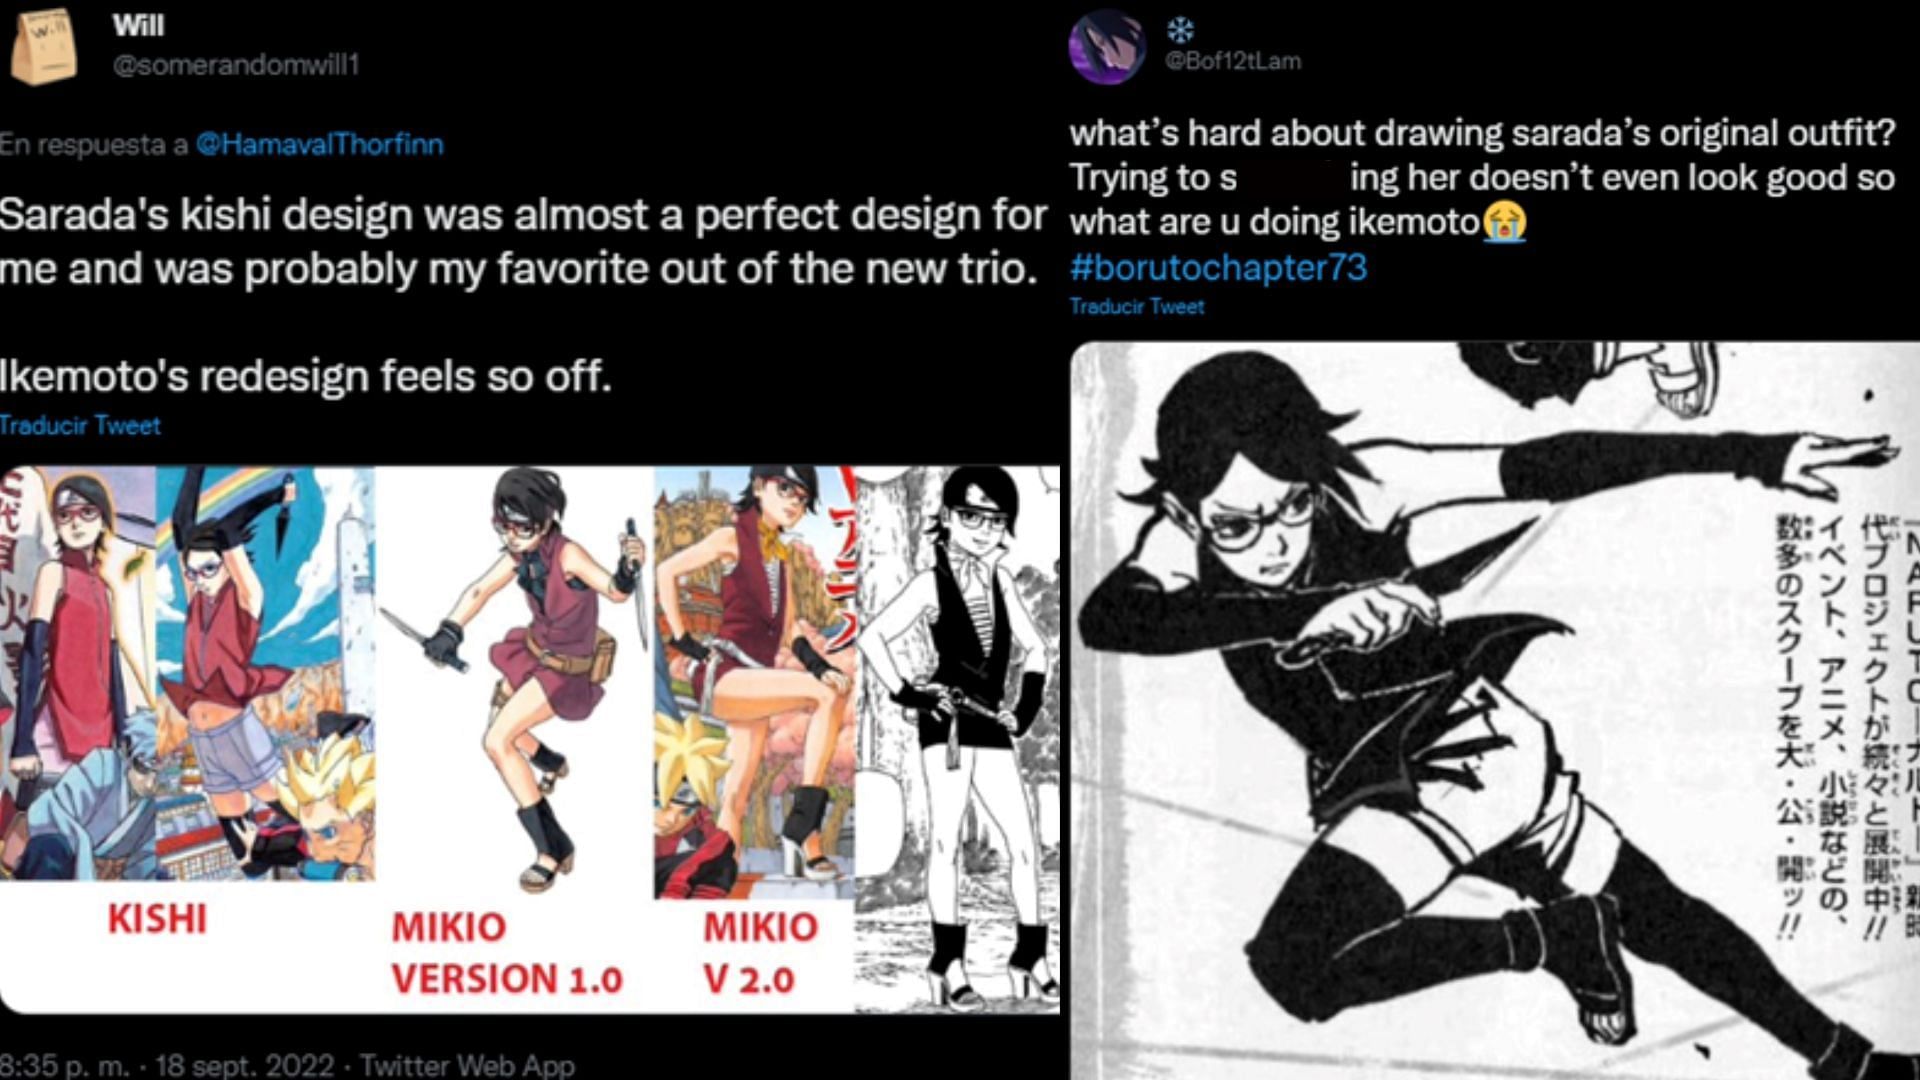 Naruto fandom is outraged over Ikemoto's drawing of Sarada from Boruto  chapter 73's cover